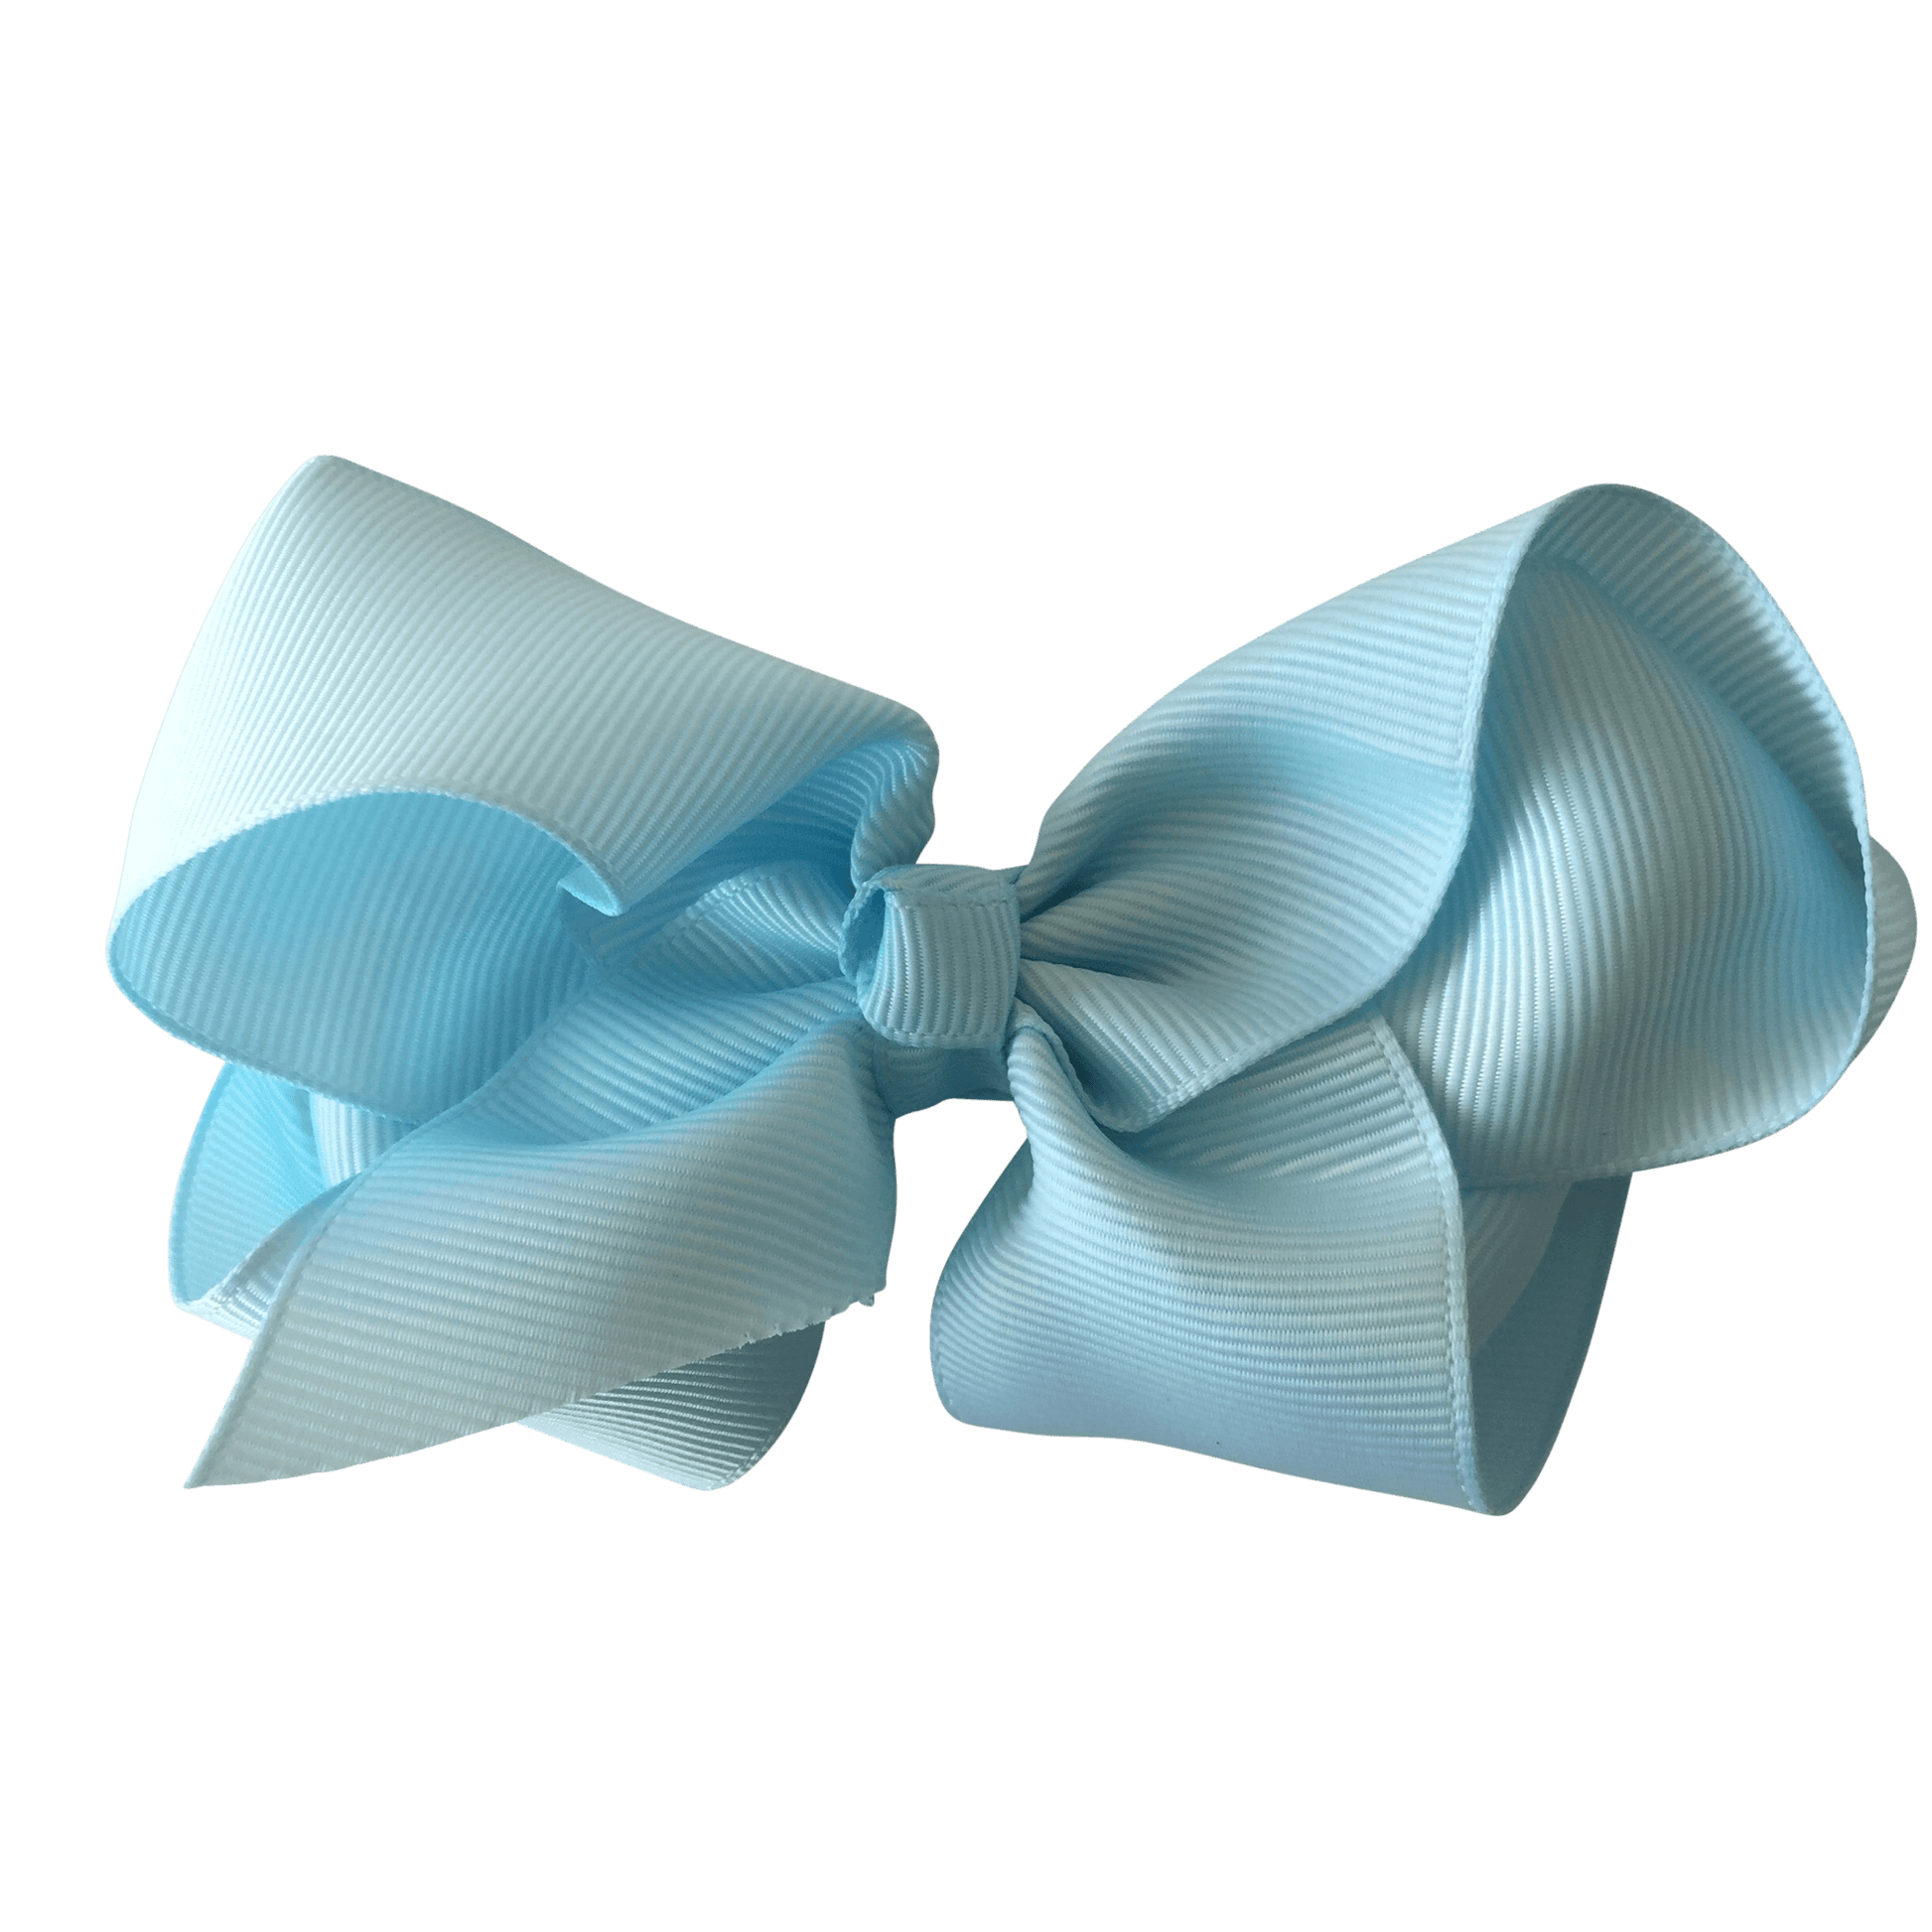 Big Sister / Little Sister Big Bow - Hair clips - School Uniform Hair Accessories - Ponytails and Fairytales